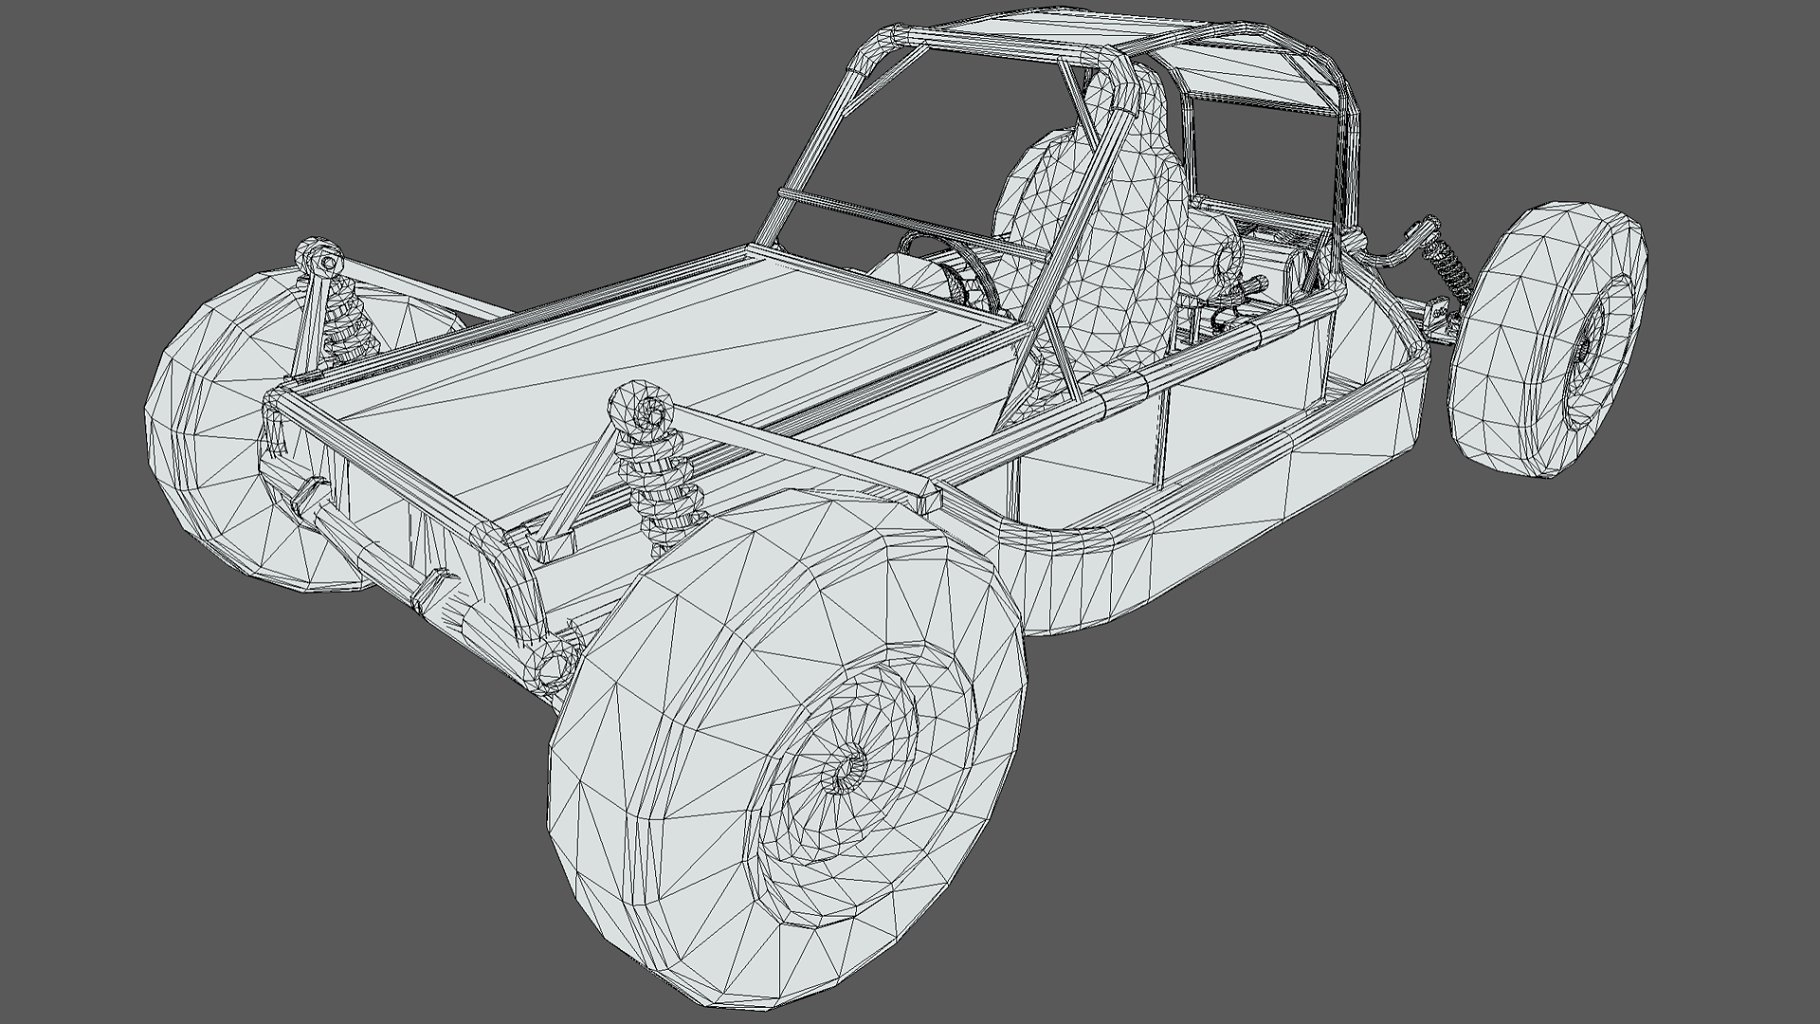 Graphic version of buggy pbr on a dark gray background.